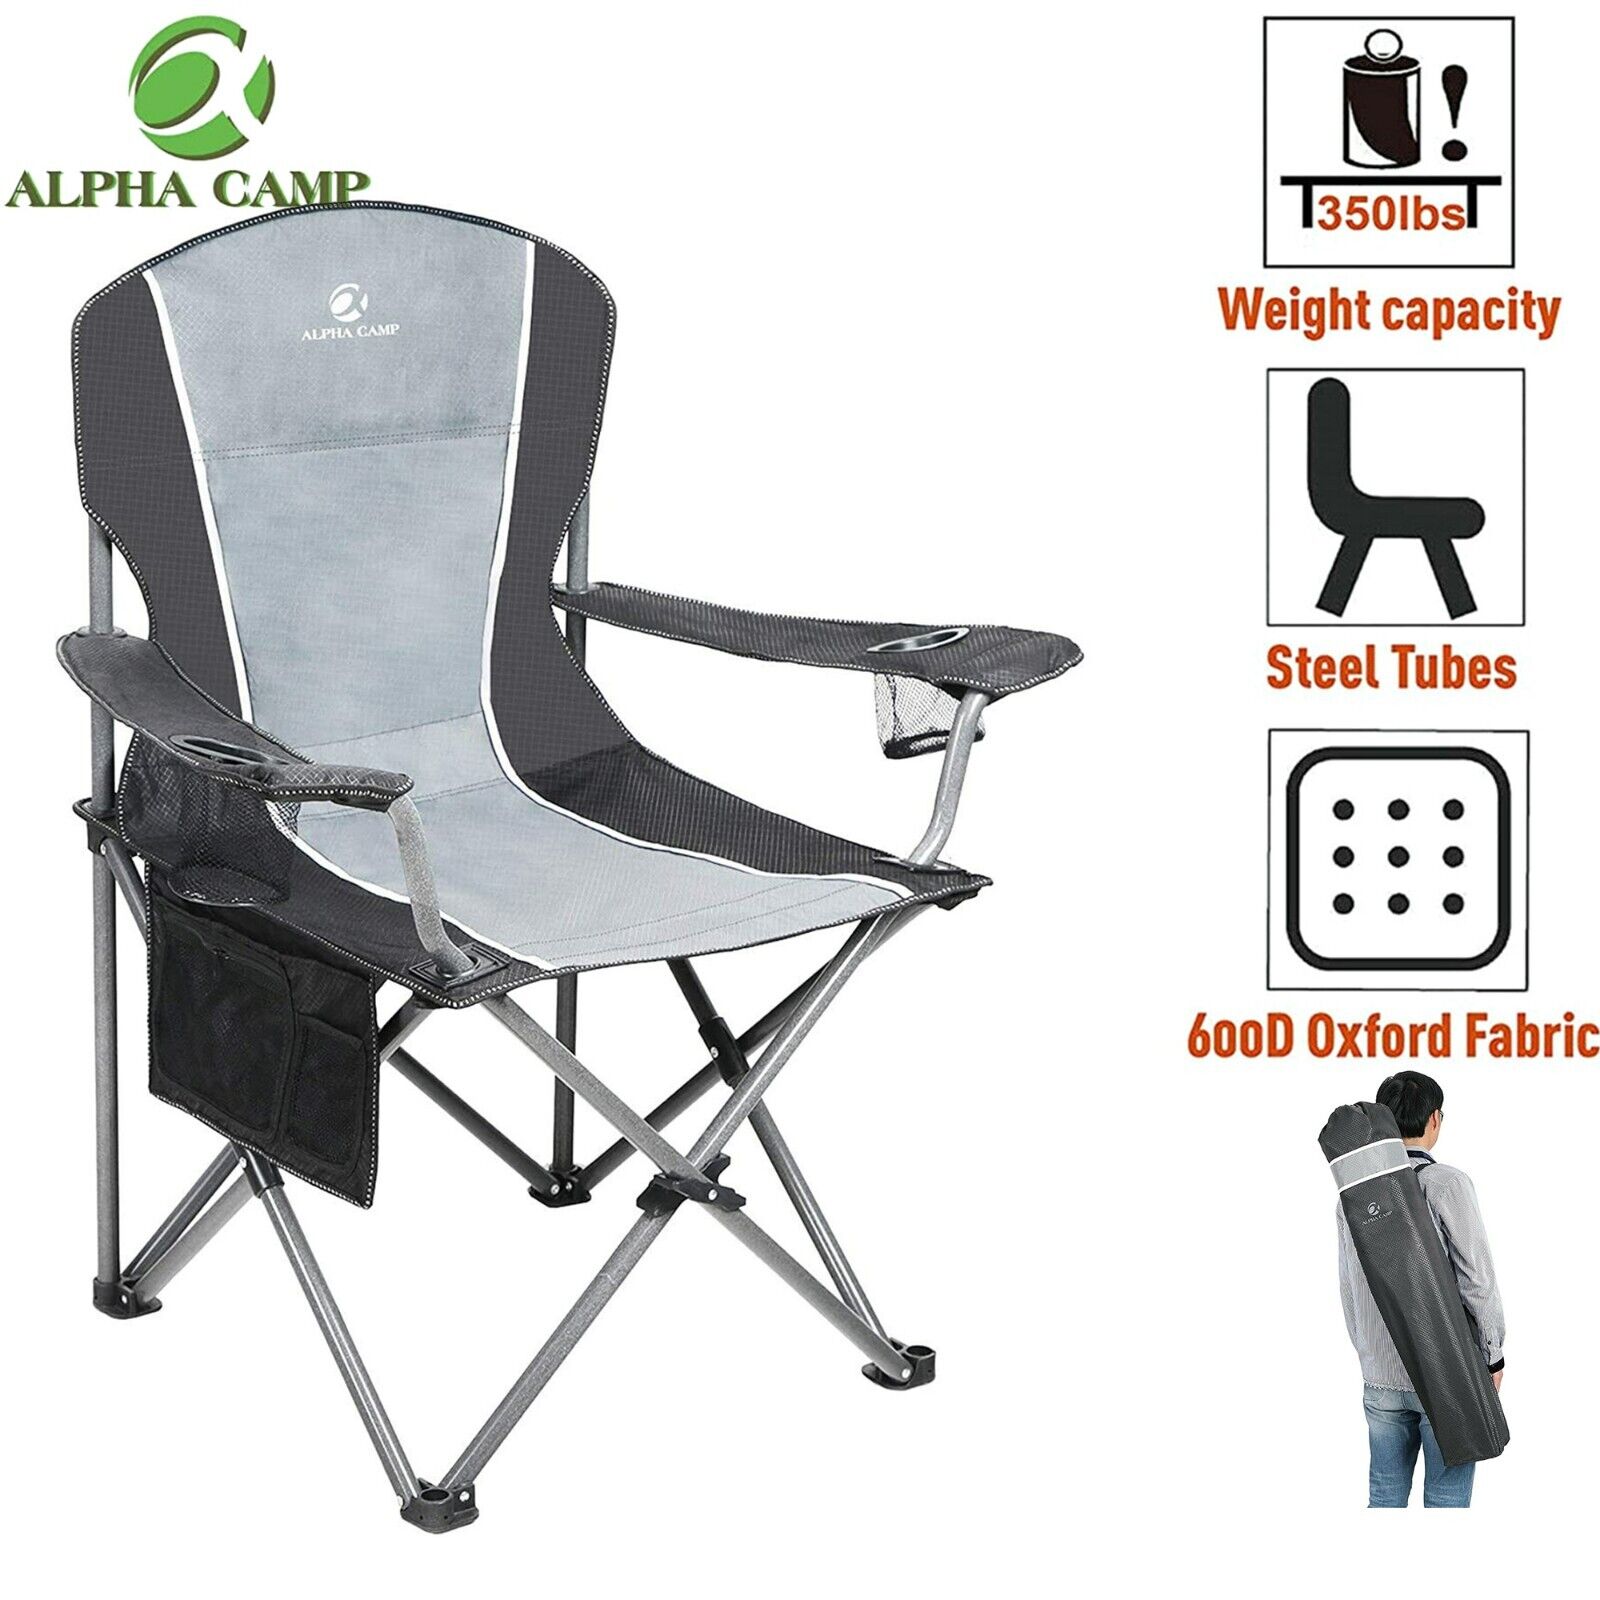 S Collapsible Arm Chair W/ Cup Holders Carry Bag